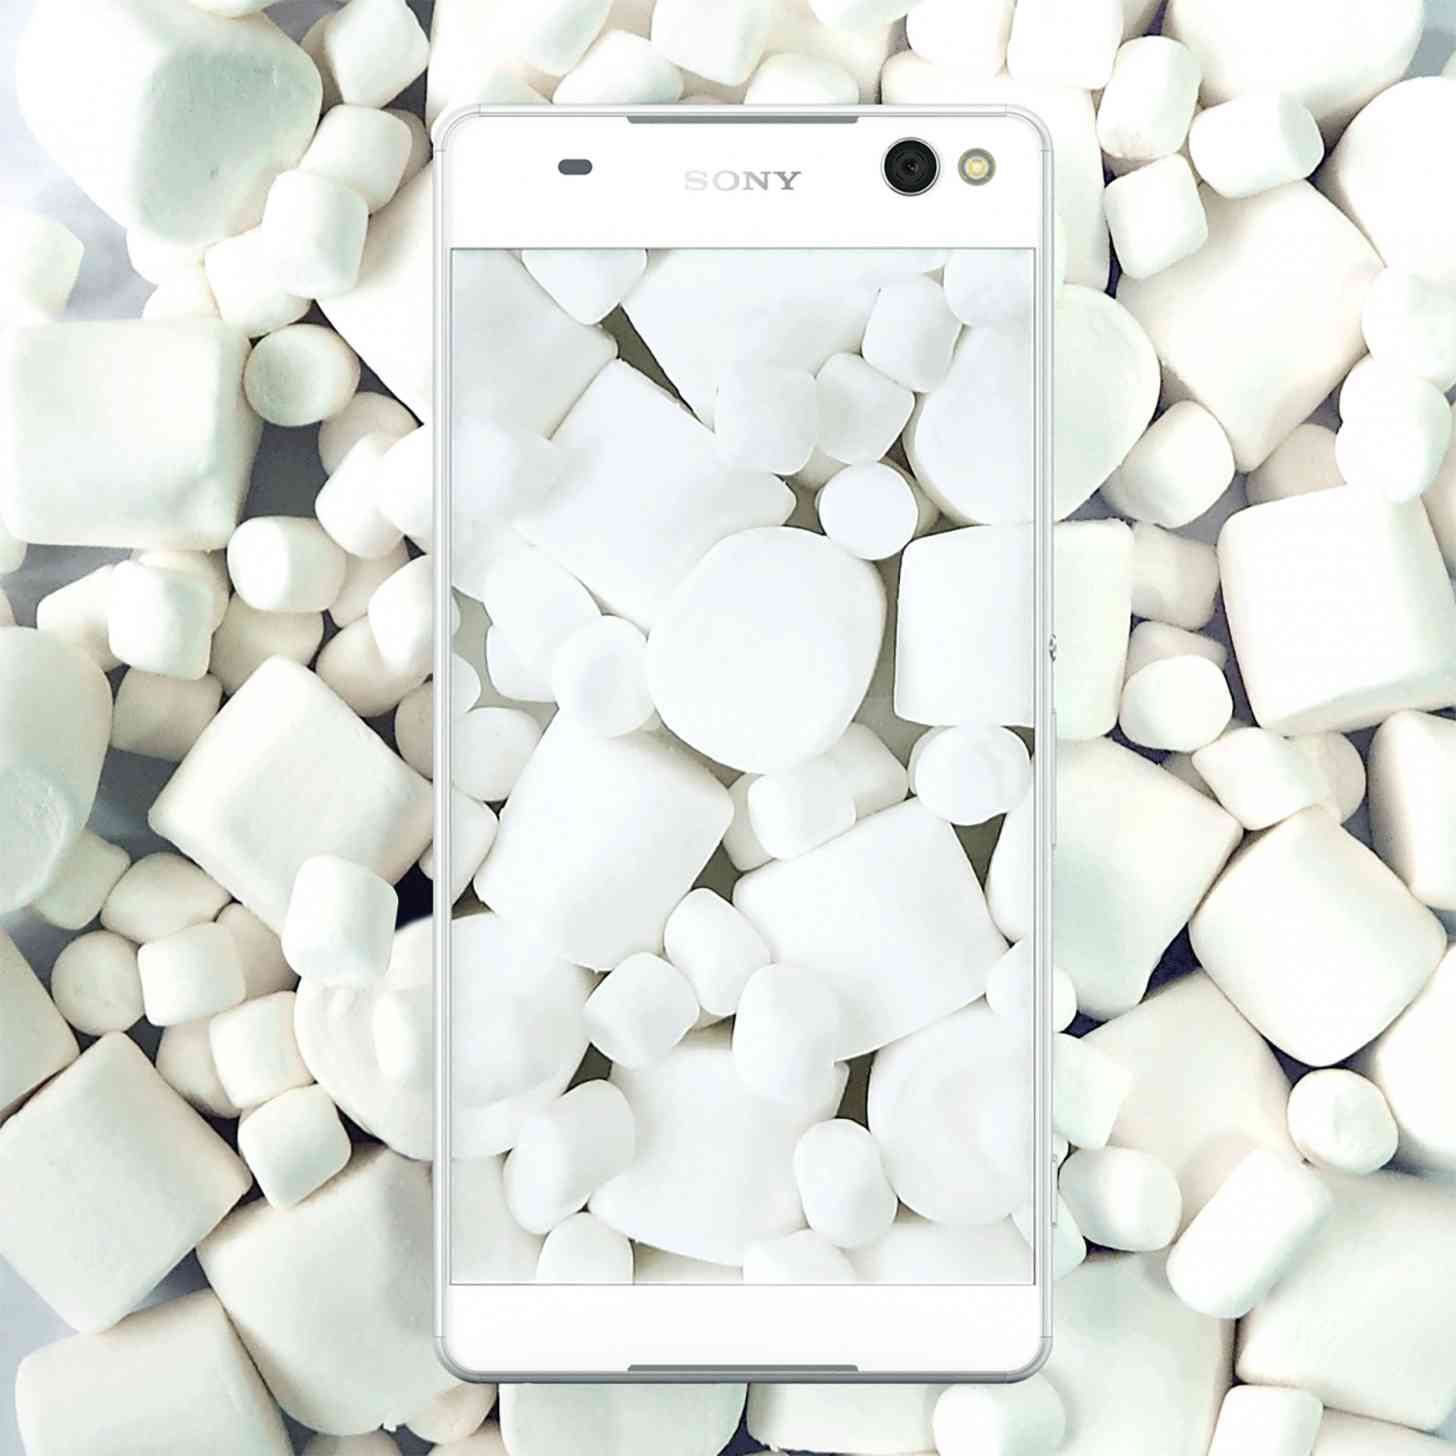 Sony Xperia Android 6.0 Marshmallow large